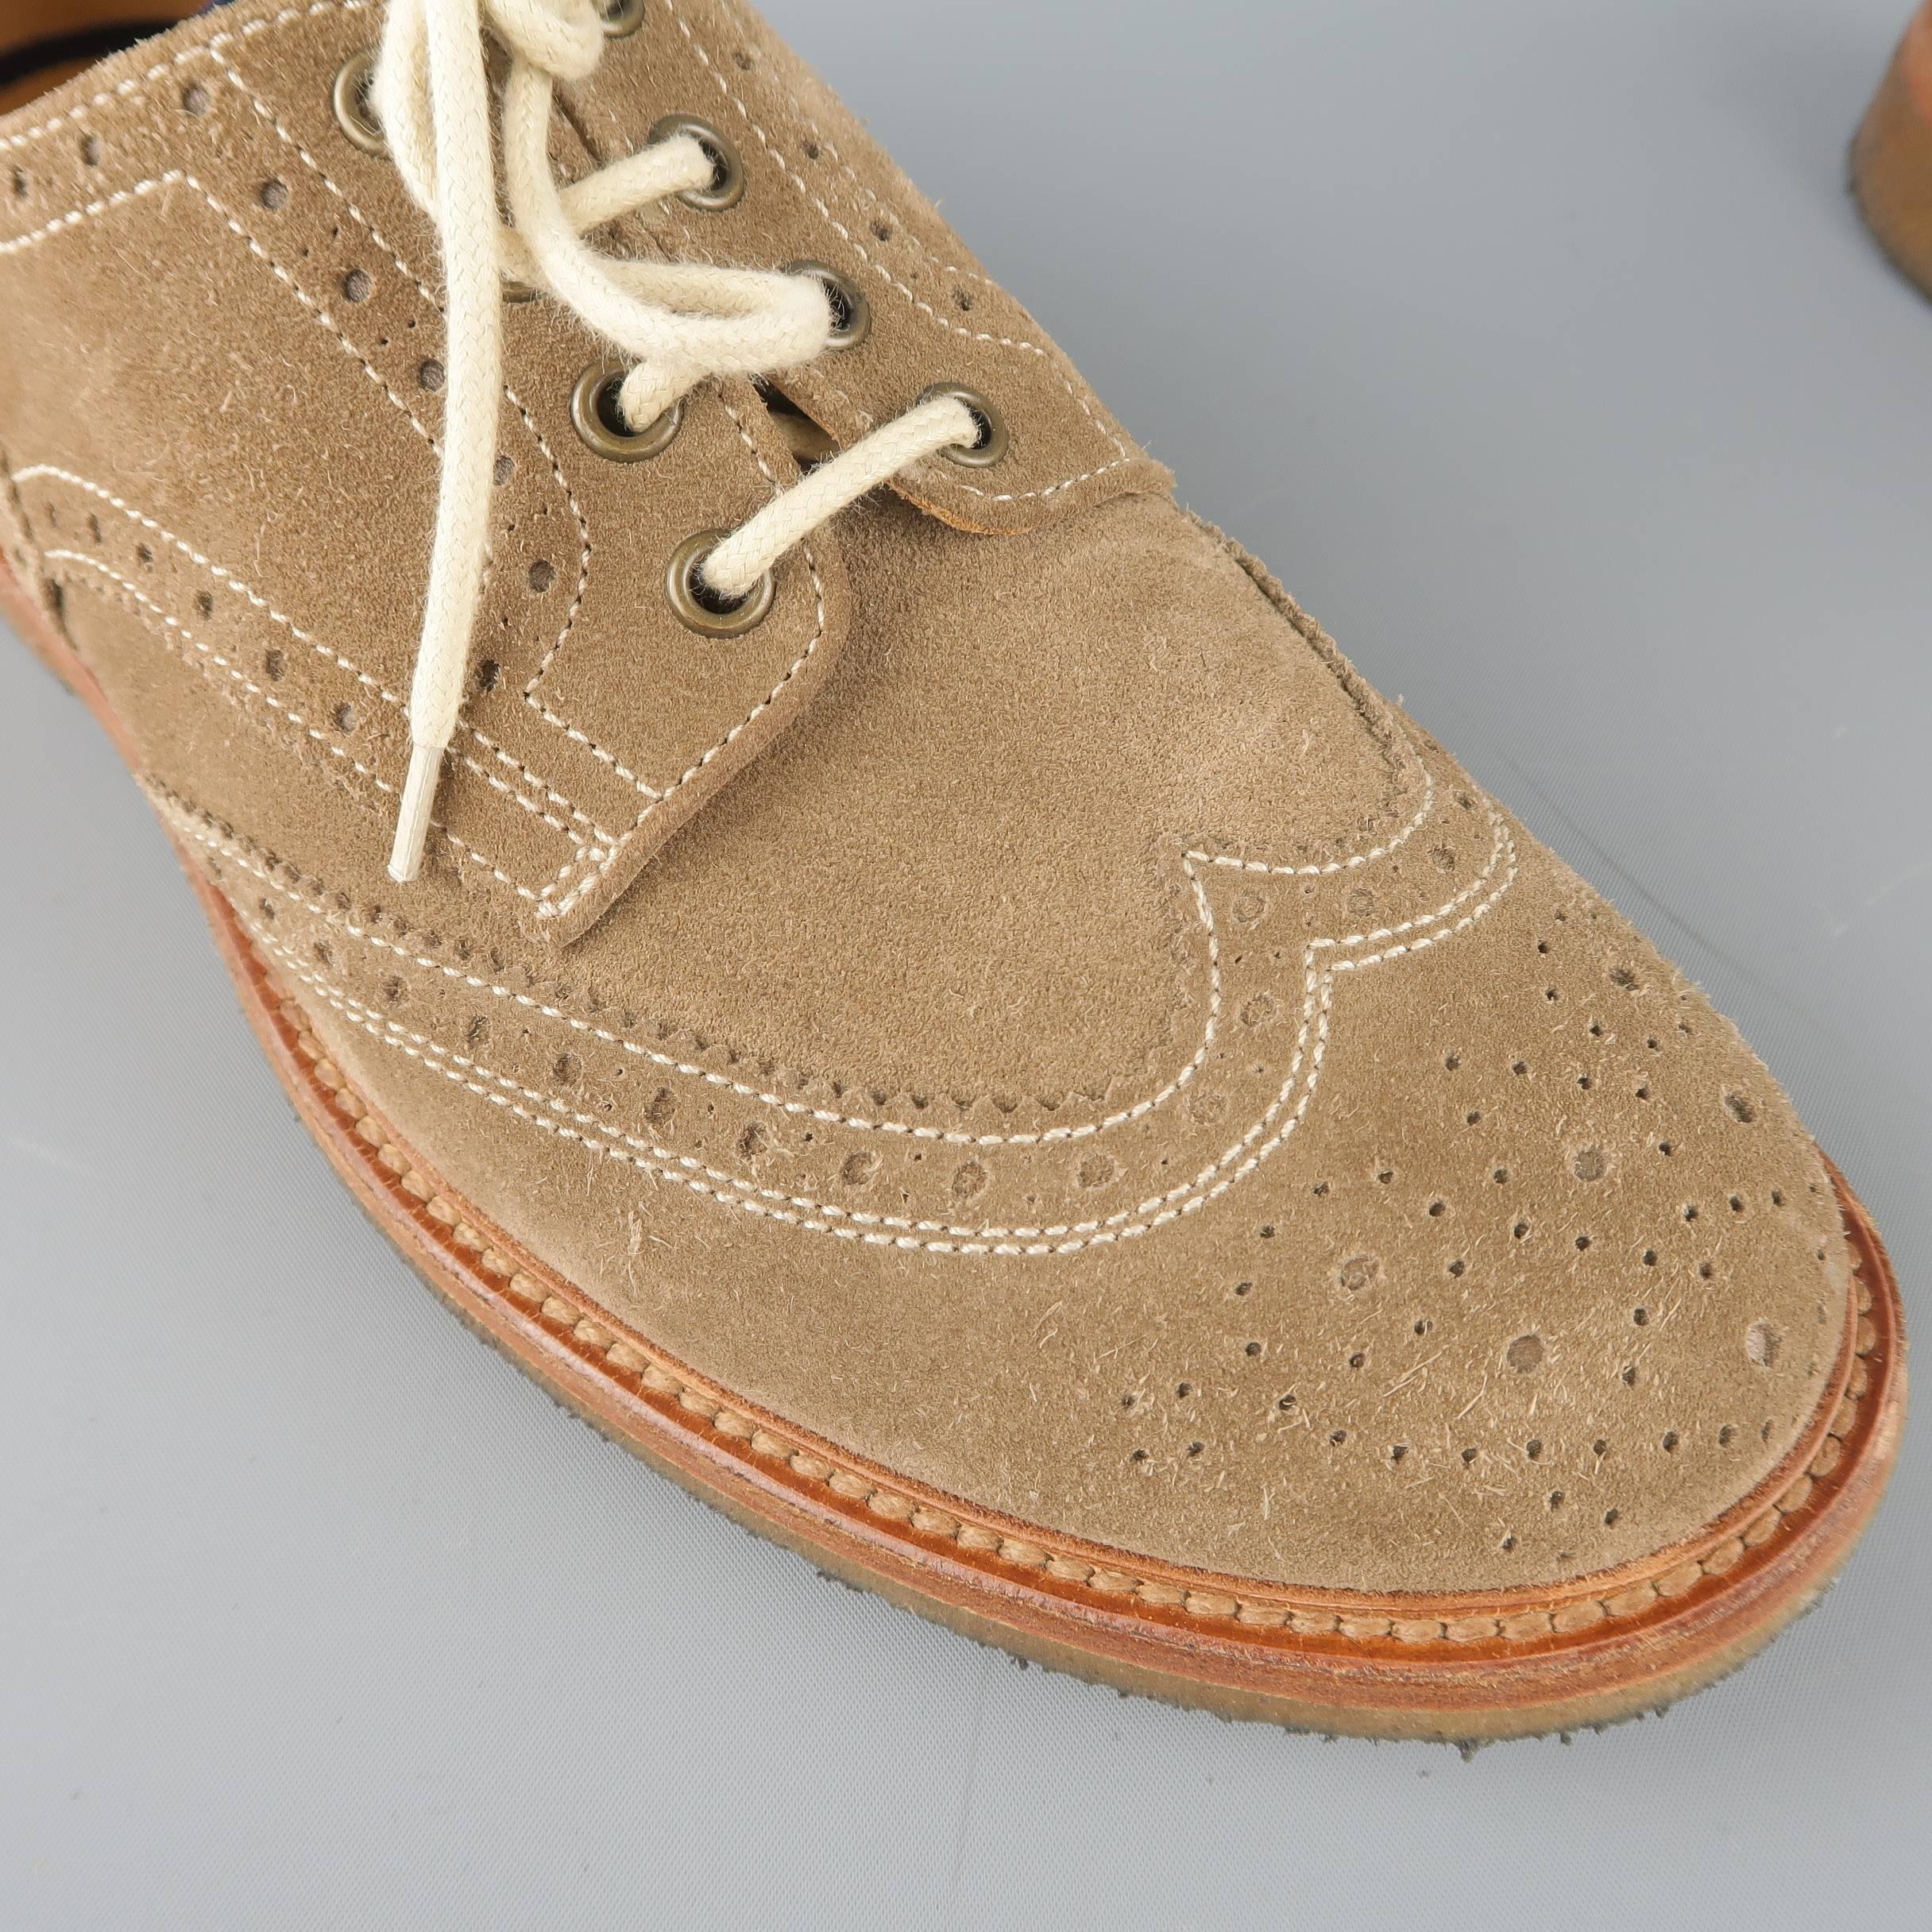 BRUNELLO CUCINELLI dress shoes come in taupe suede with all over perforated brogue details, wingtip toe, and crepe sole. Made in Italy.
 
Good Pre-Owned Condition.
Marked: IT 42.5
 
Outsole: 12 x 4.25 in.
